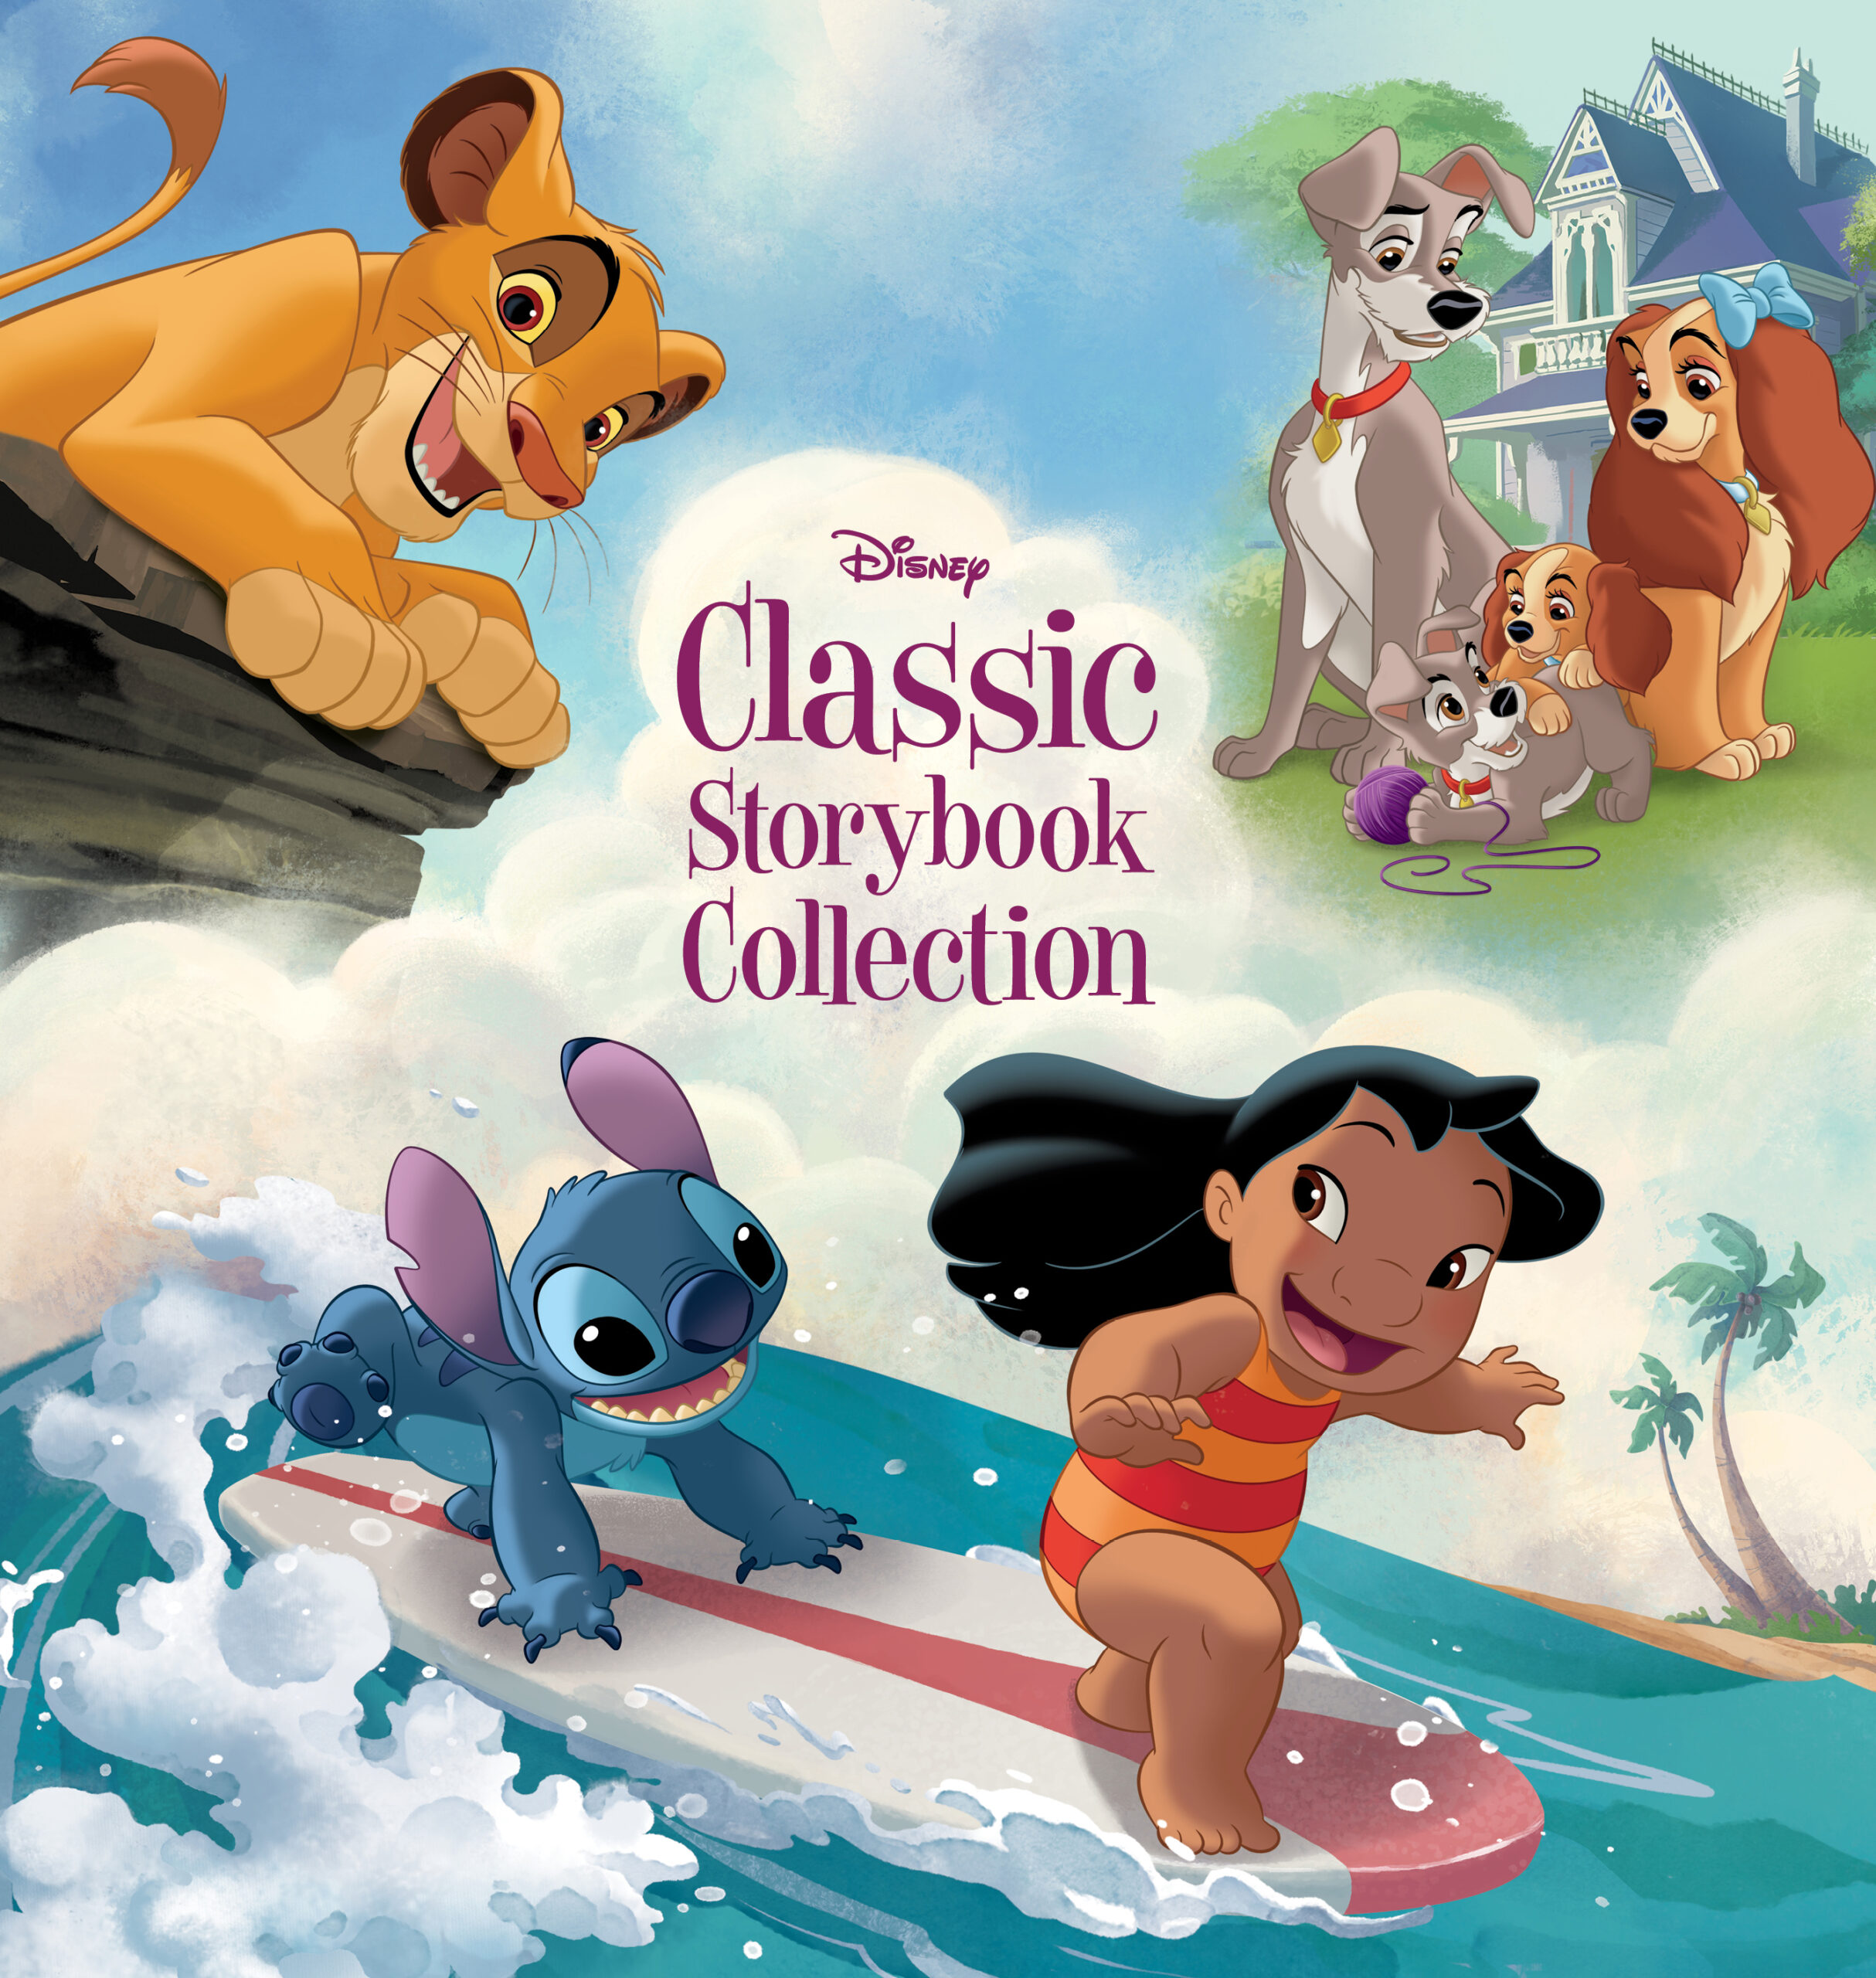 Disney Classic Storybook Collection by Disney Books Disney Storybook Art  Team - Disney Books